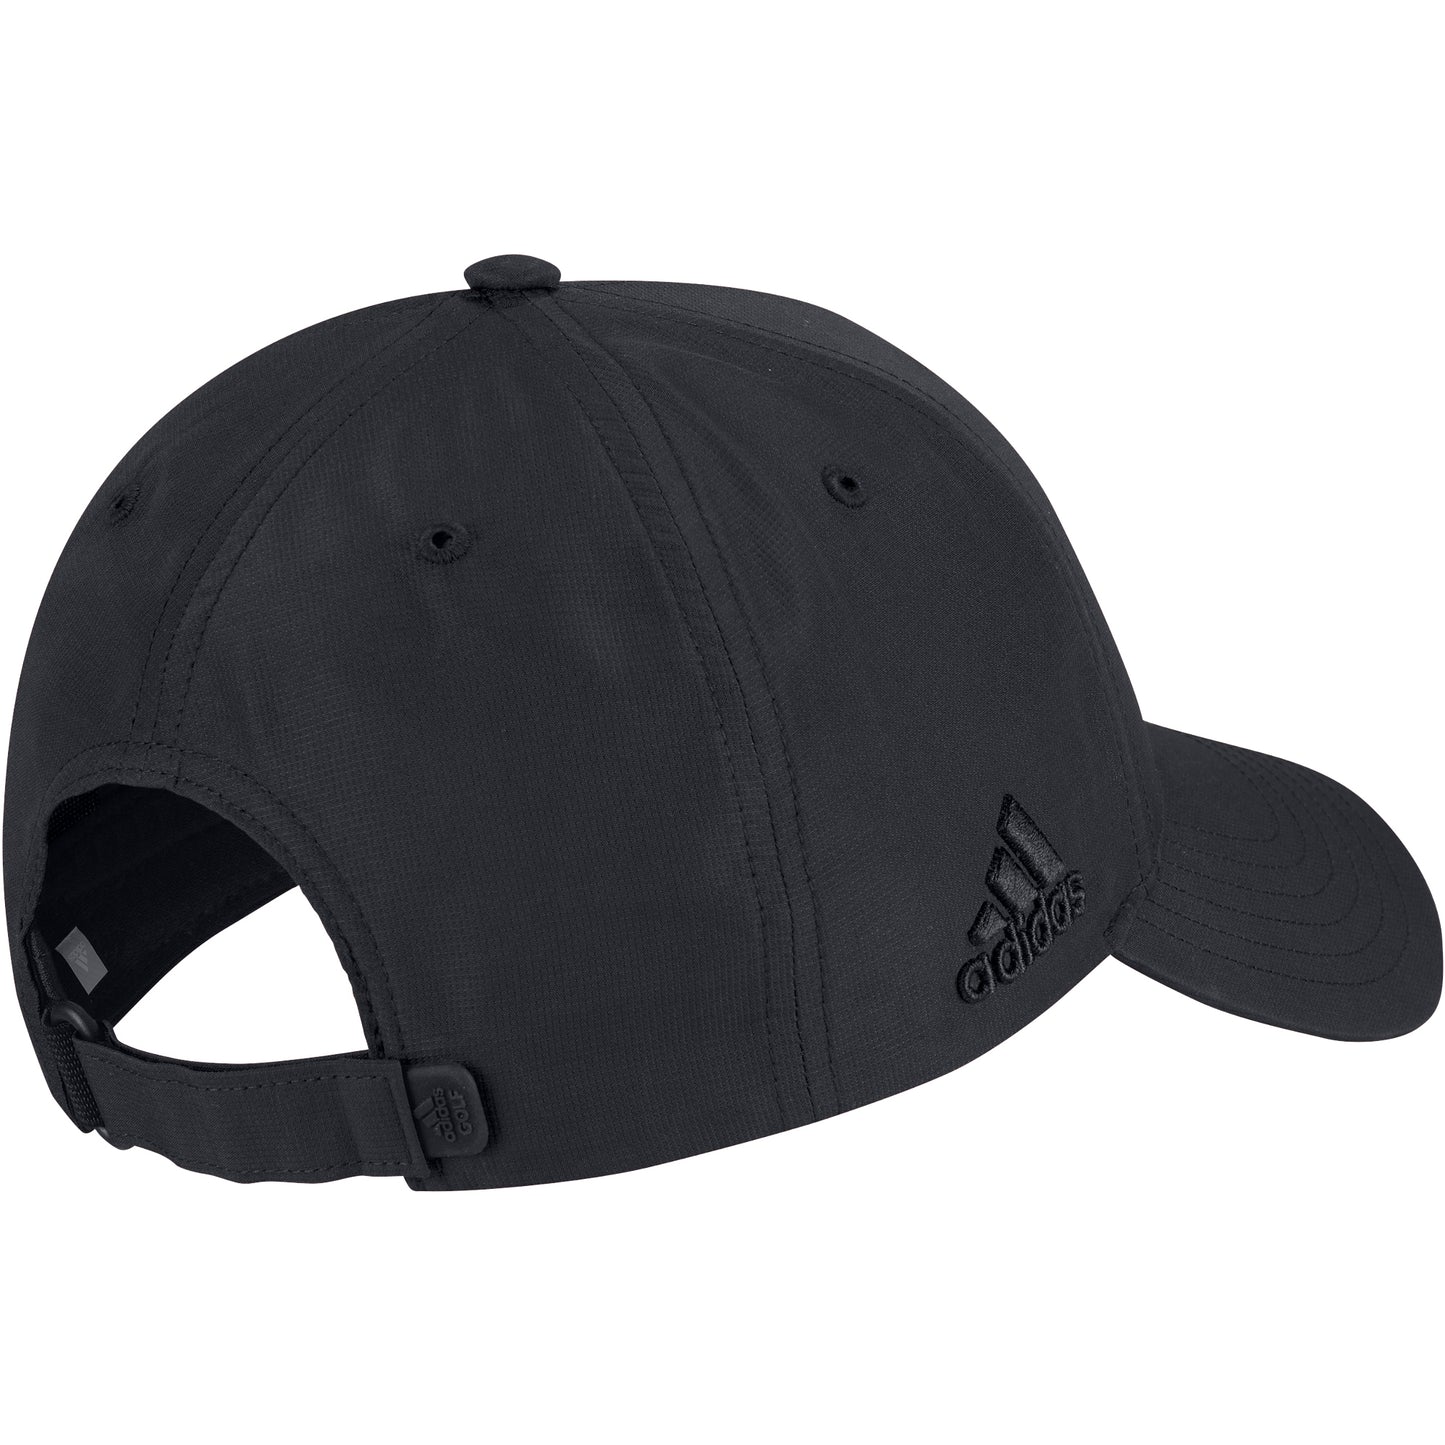 Team Hat – Golf Performance Crestable Products